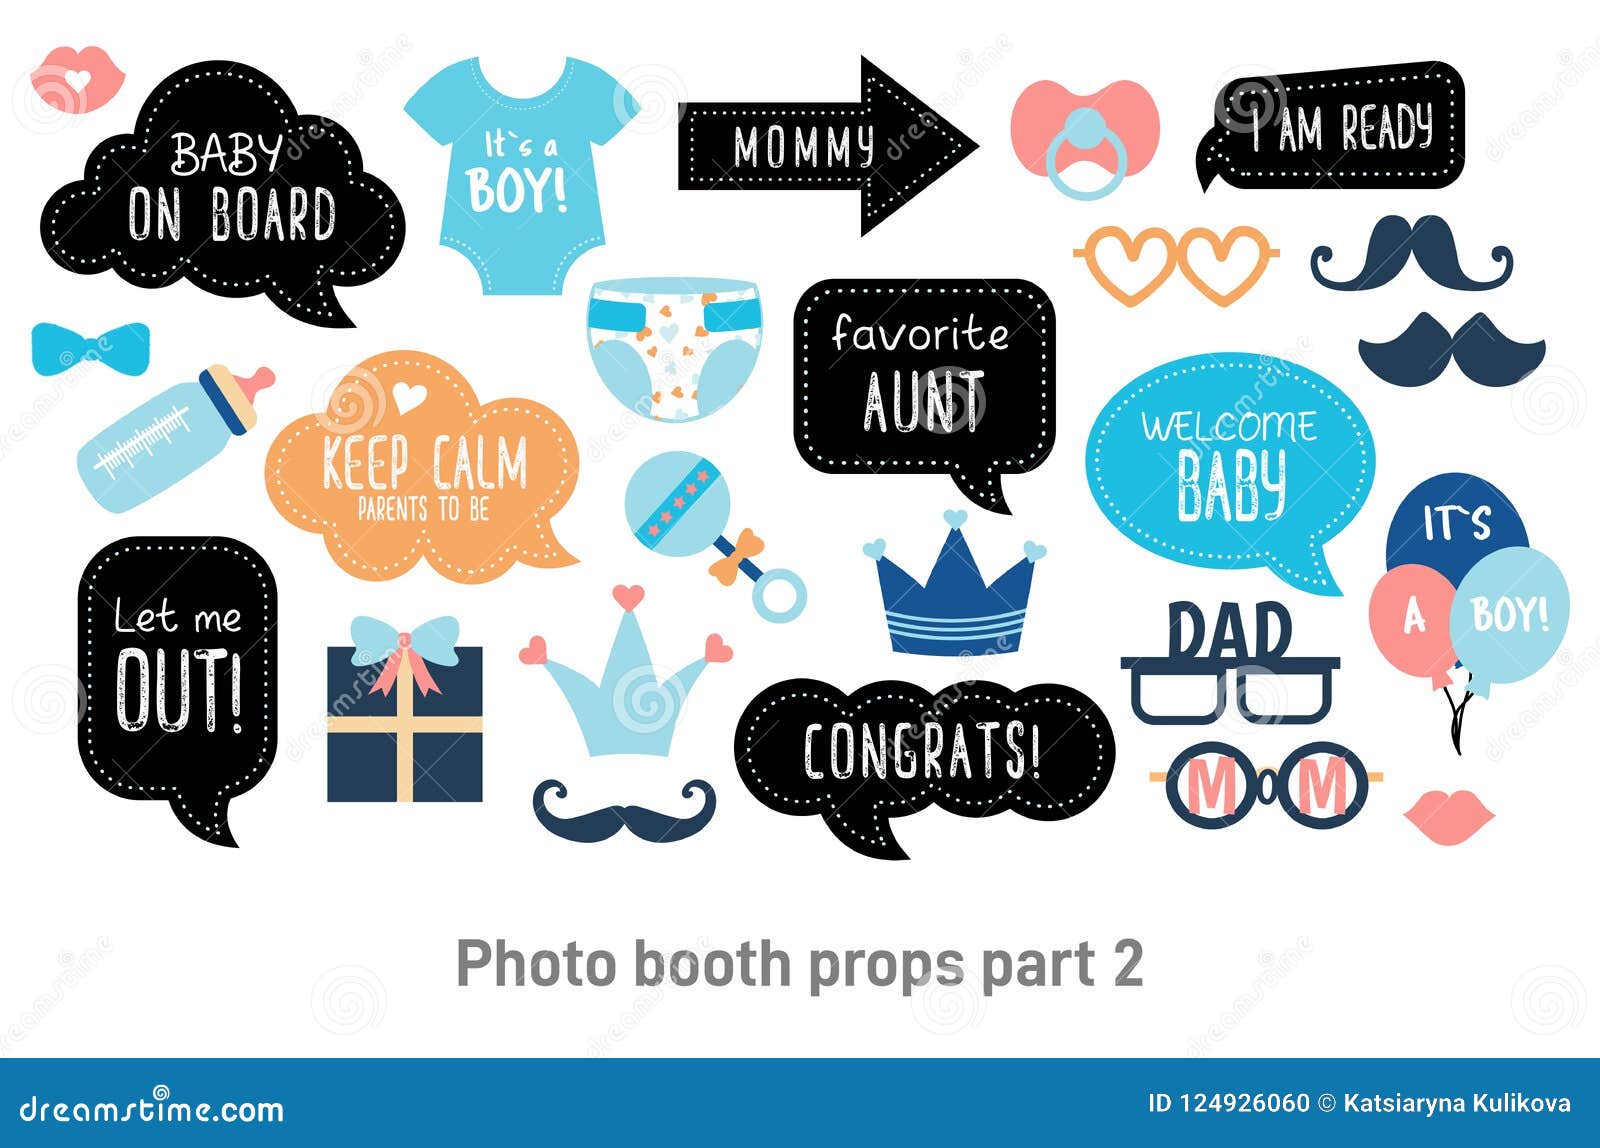 25pc It's A Boy Baby Shower Photo Booth Props Birthday New Born Party Decor 